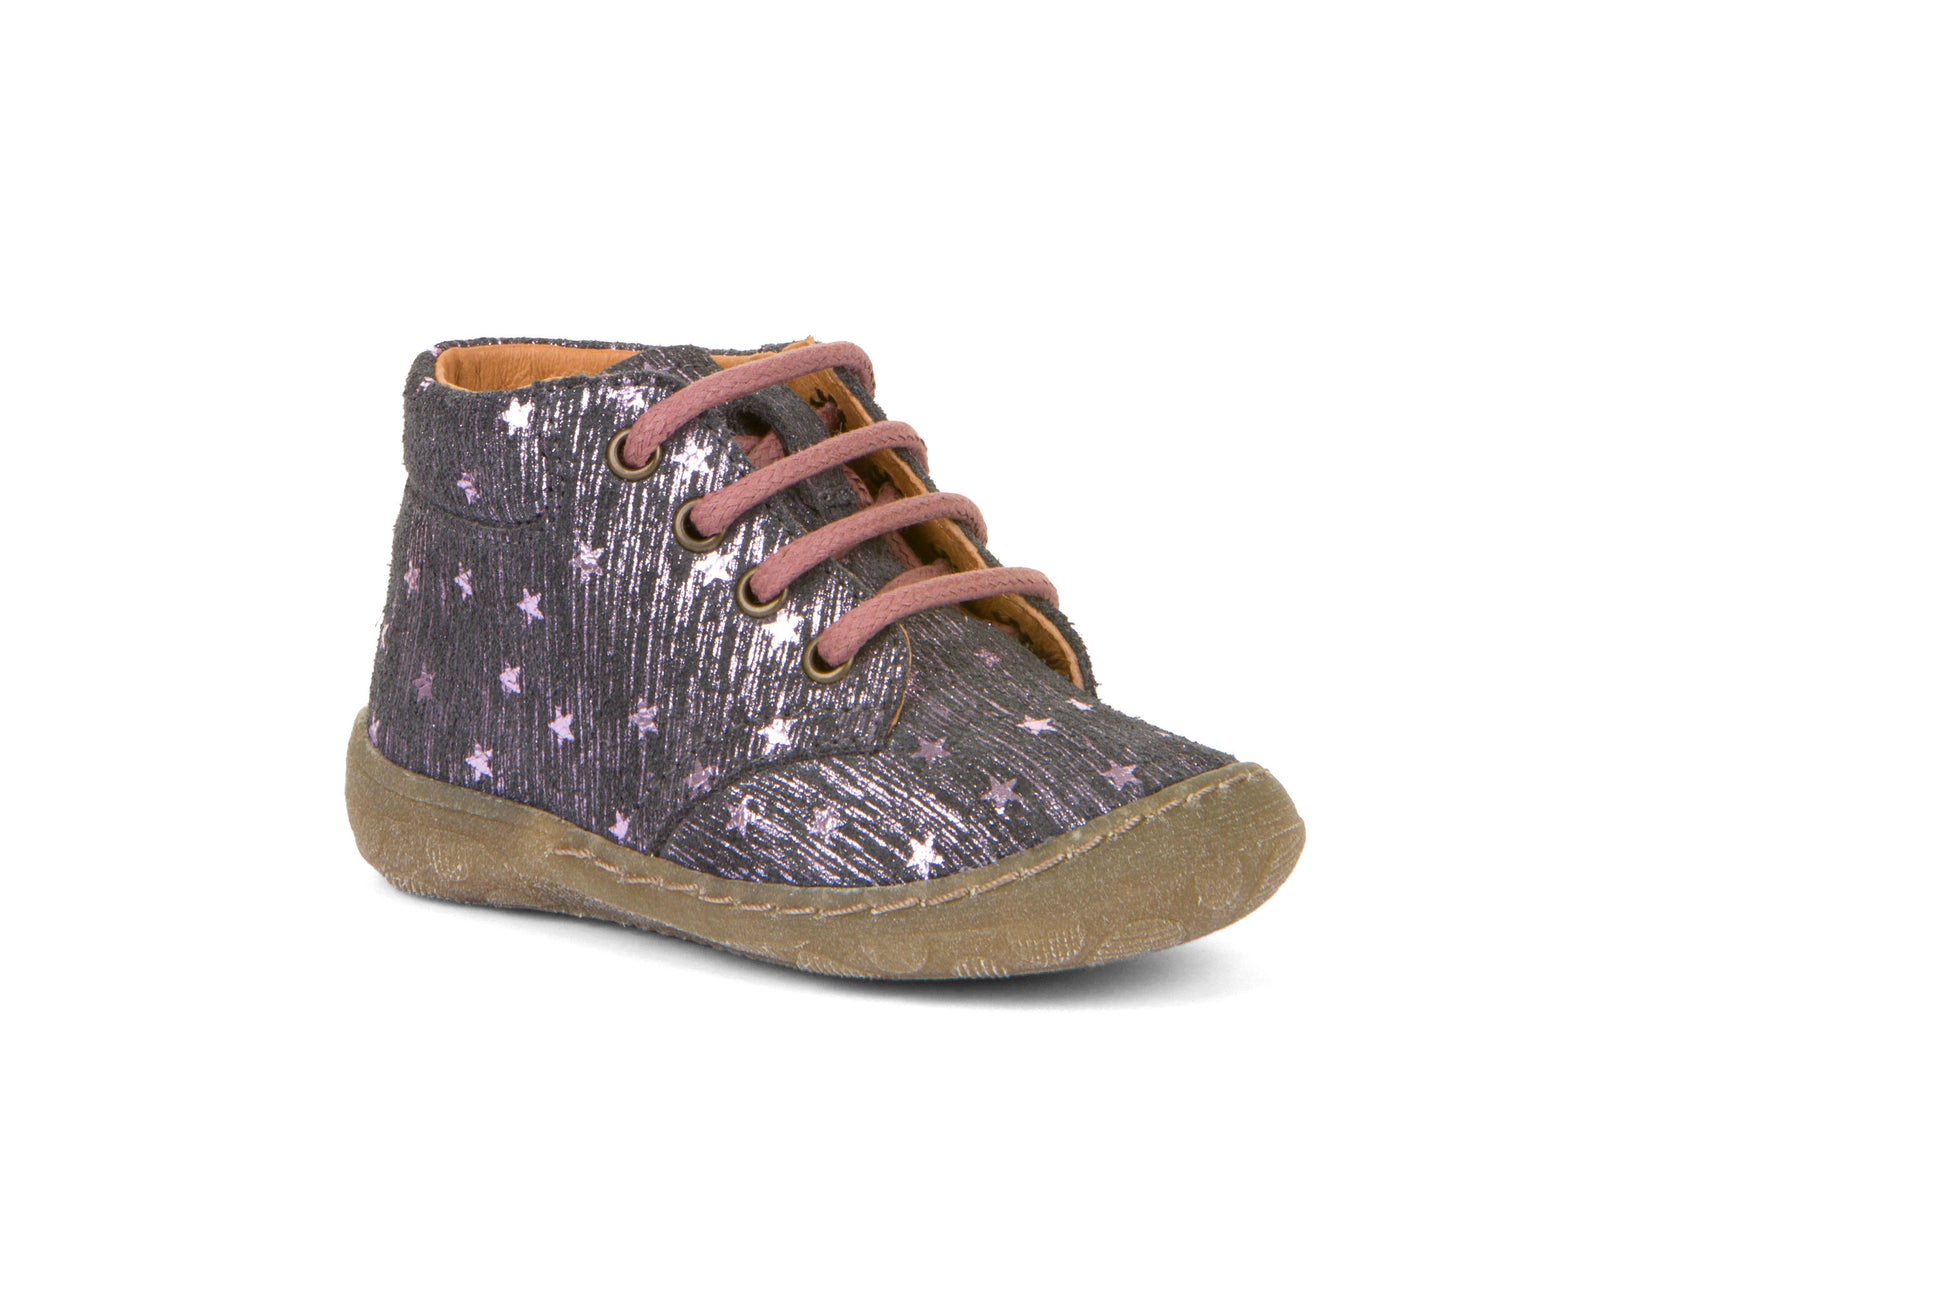 A girls boot by Froddo, style Kart Laces | G2130271-3 in Grey Metallic with star print and lace-up fastening. Right front side view.